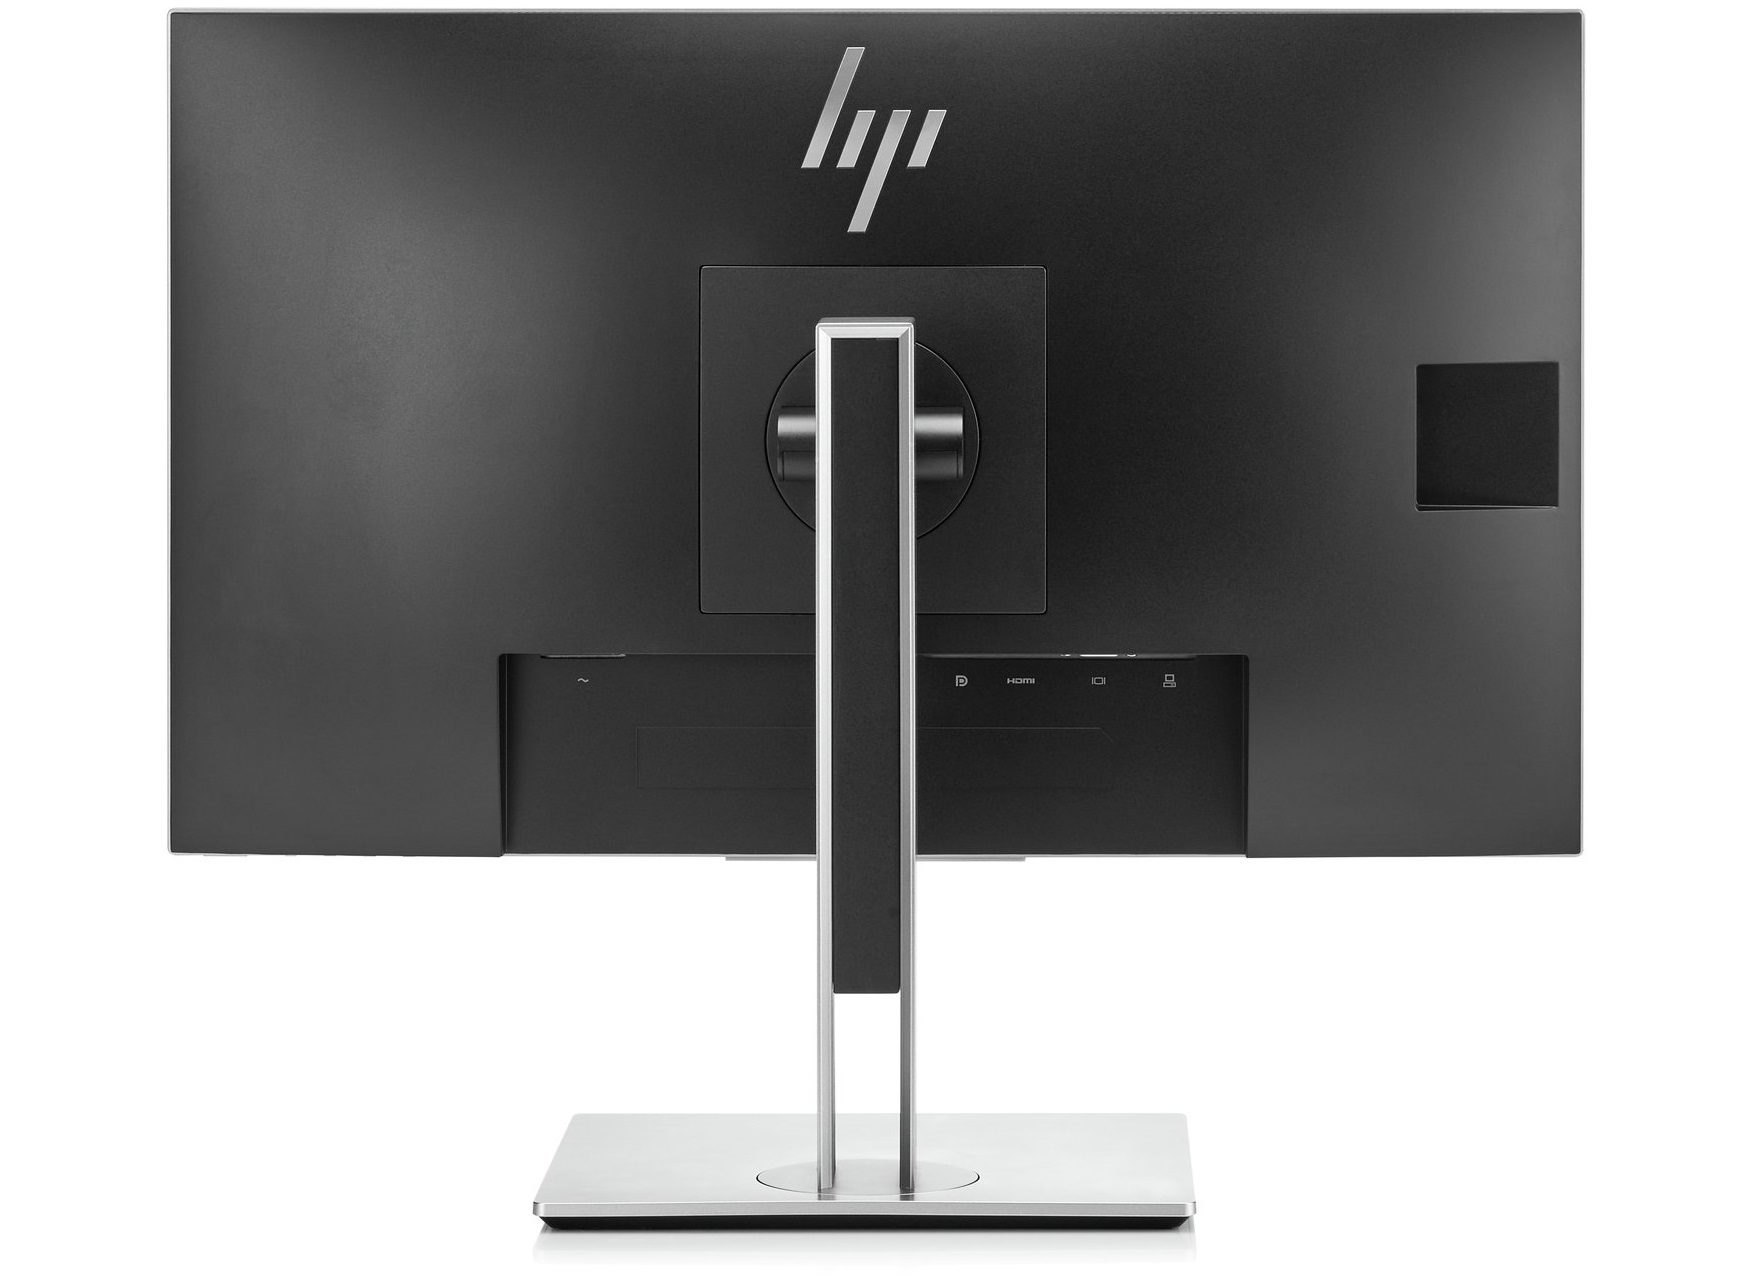 Bundle HP ProDesk 600 G4 SFF + HP E243 Monitor | Intel Core i7-8700 3.2Ghz | 8 Ram DDR4 | SSD 256| Windows 10 Pro | FullHD 1920x1080 HDMI Lots of power and design in a single bundle